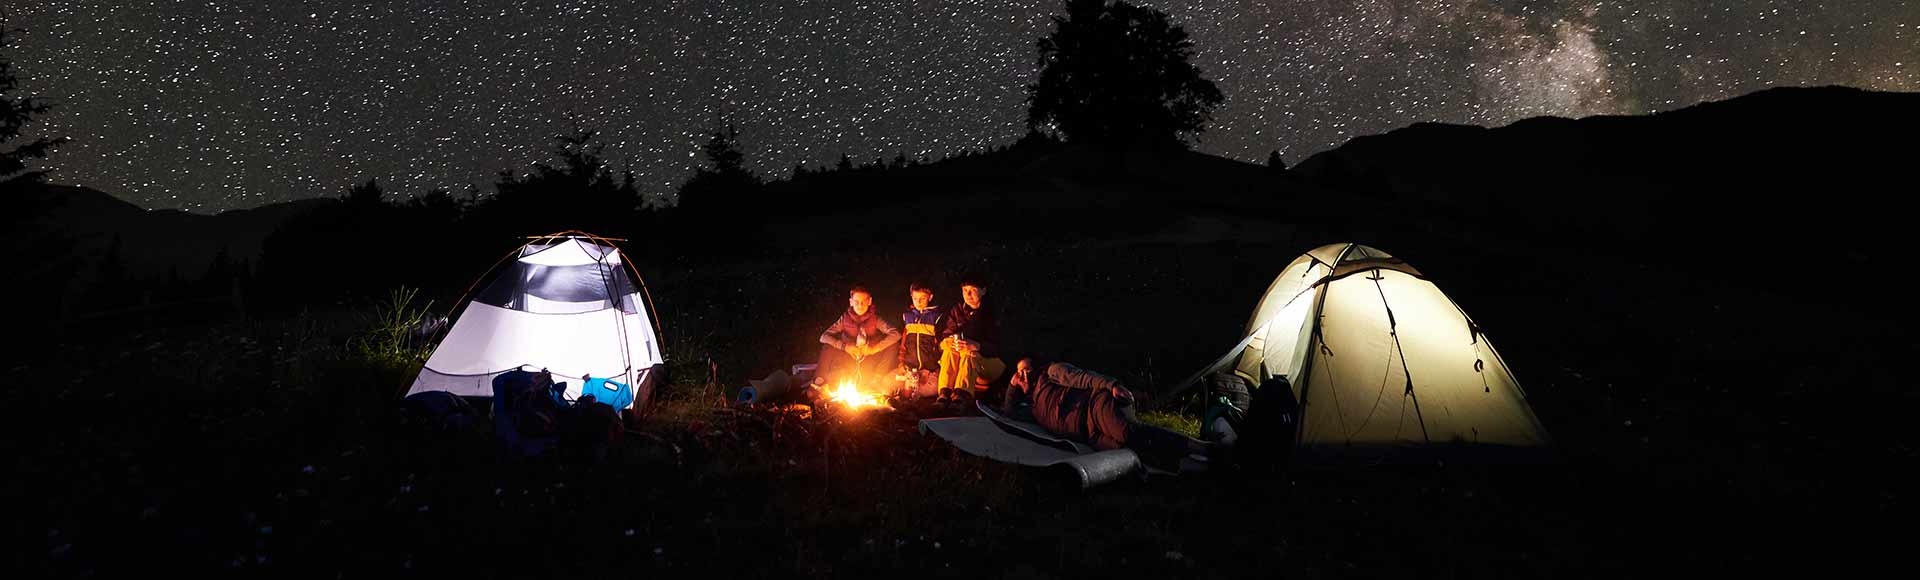 Family by the fire on a starry night